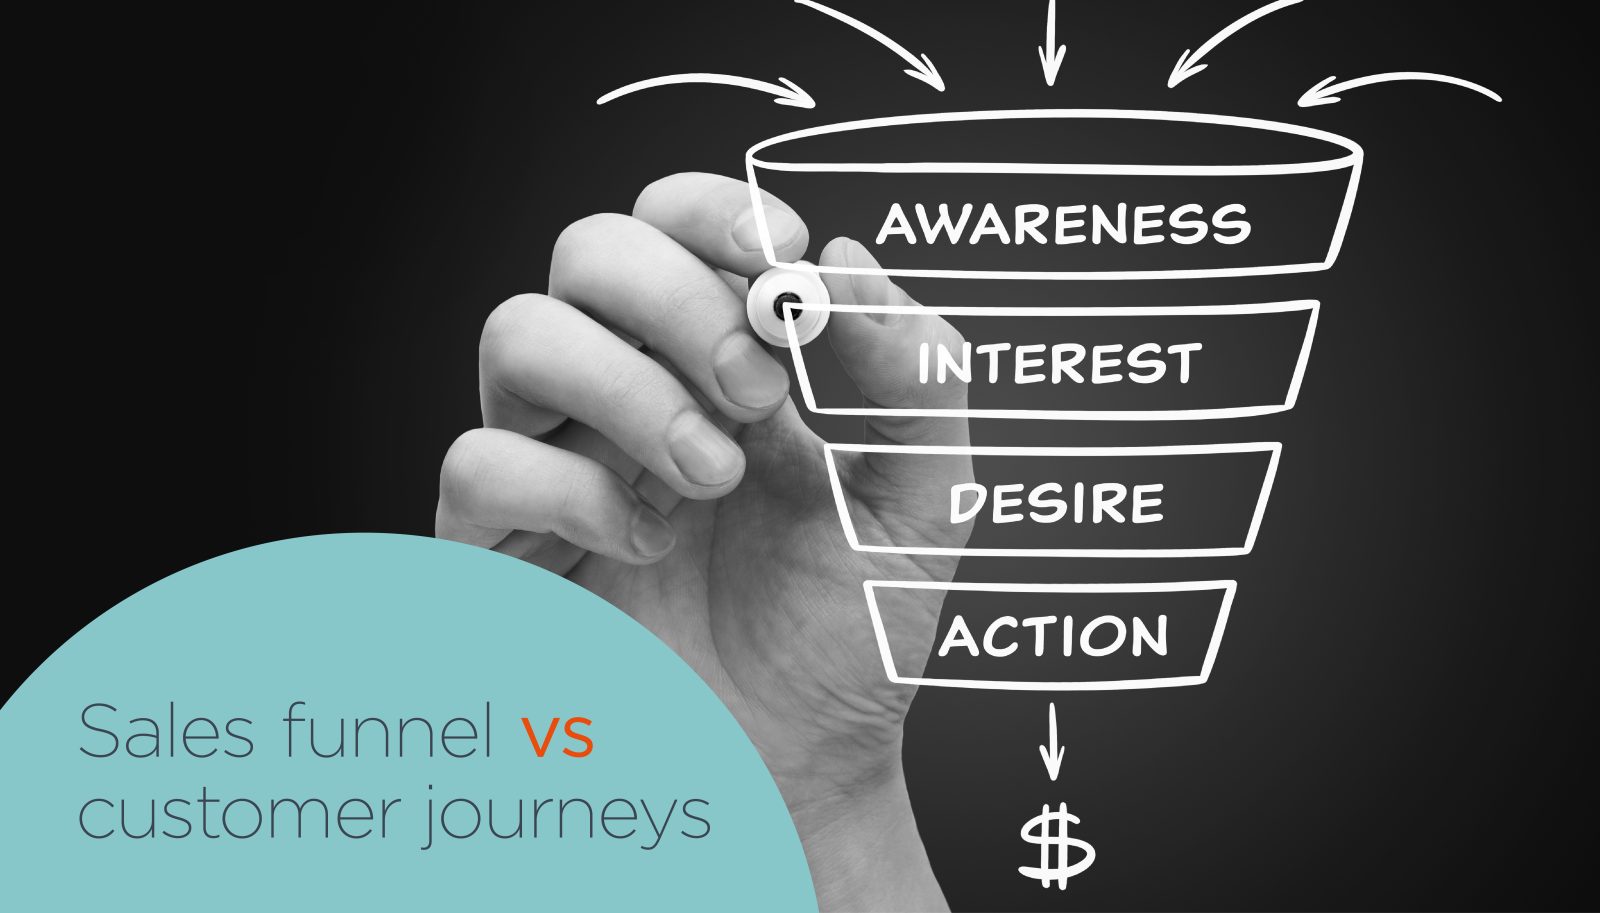 How do Sales Funnels and Customer Journeys relate to each other?